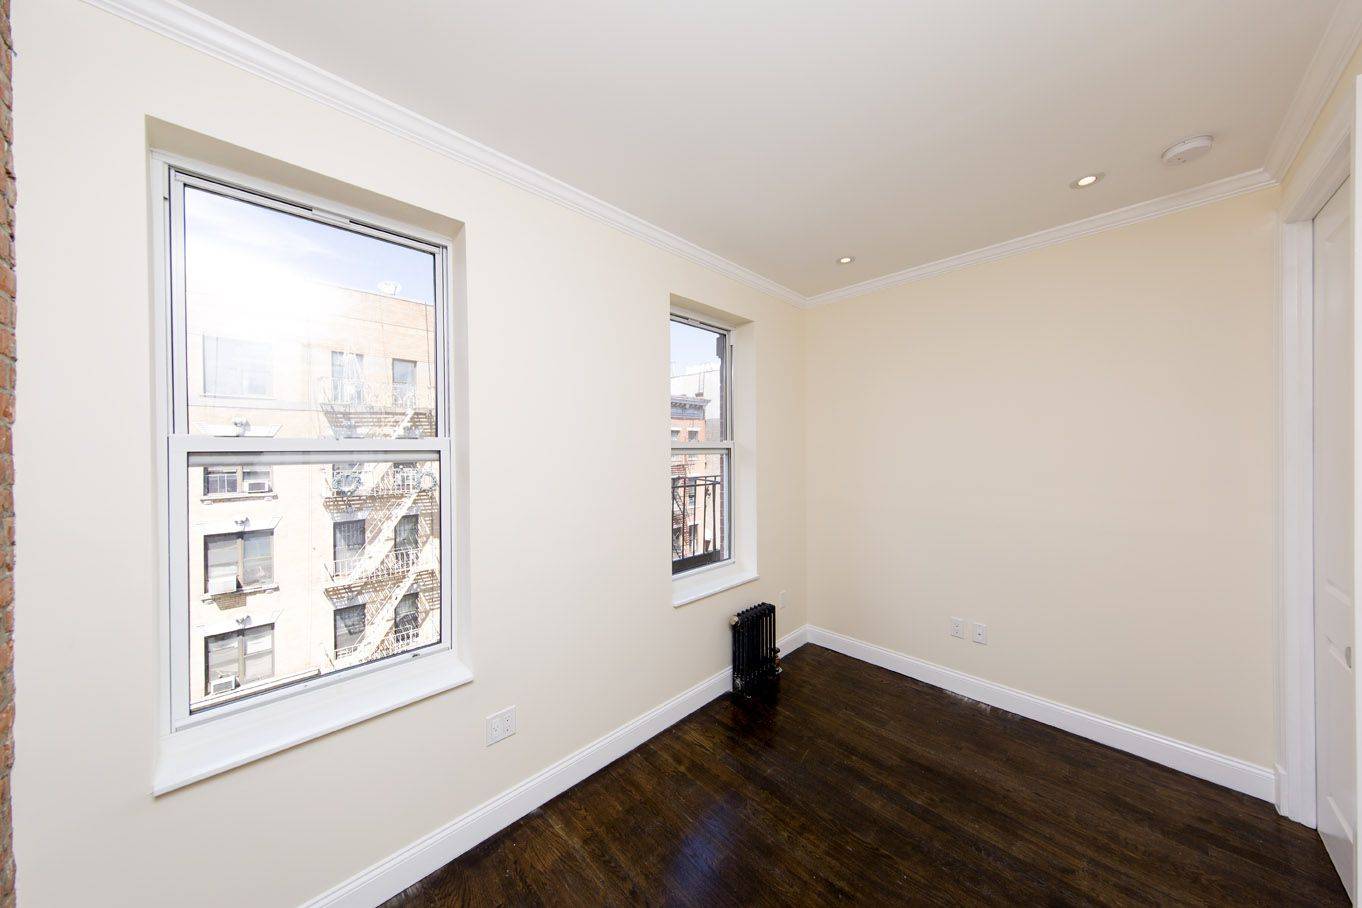 No Fee Brand New Convertible 2 Bedroom Renovated Apartment for Rent in East Village